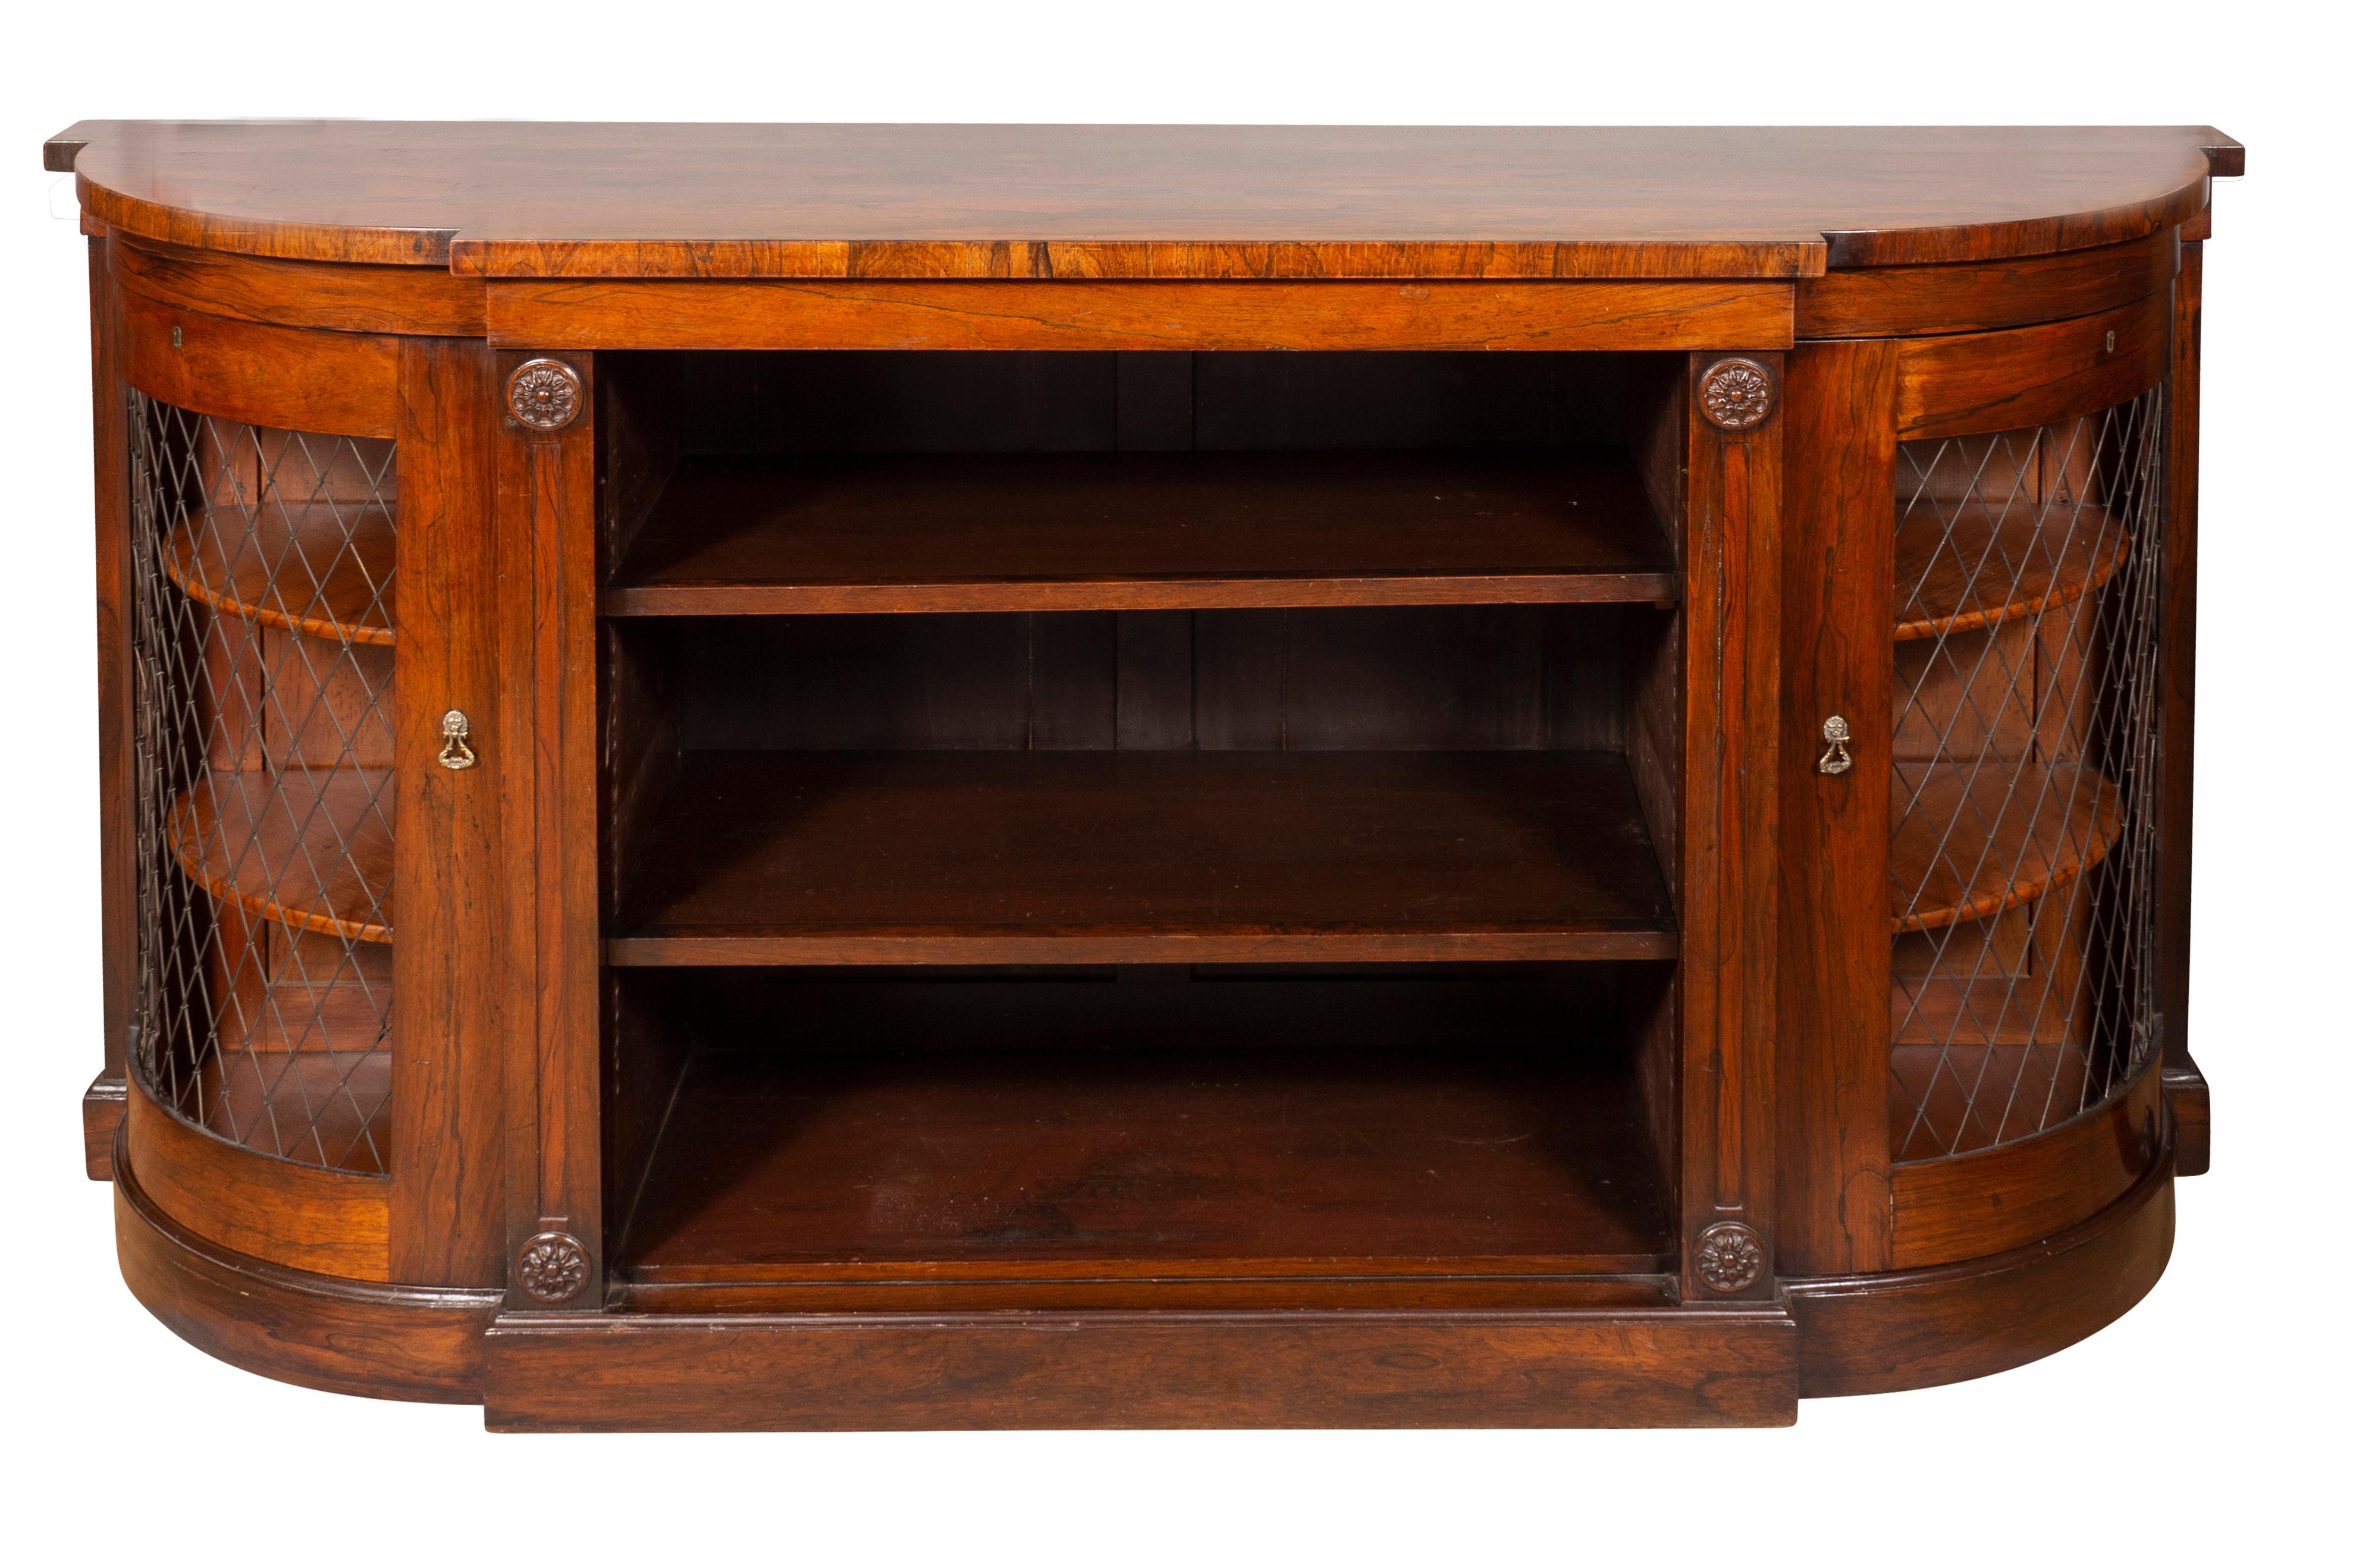 With rectangular top with rounded ends over a conforming case with central open bookcase containing two adjustable shelves, flanked by a pair of curved grill cabinet doors. The case with circular carved rosettes. Plinth base.